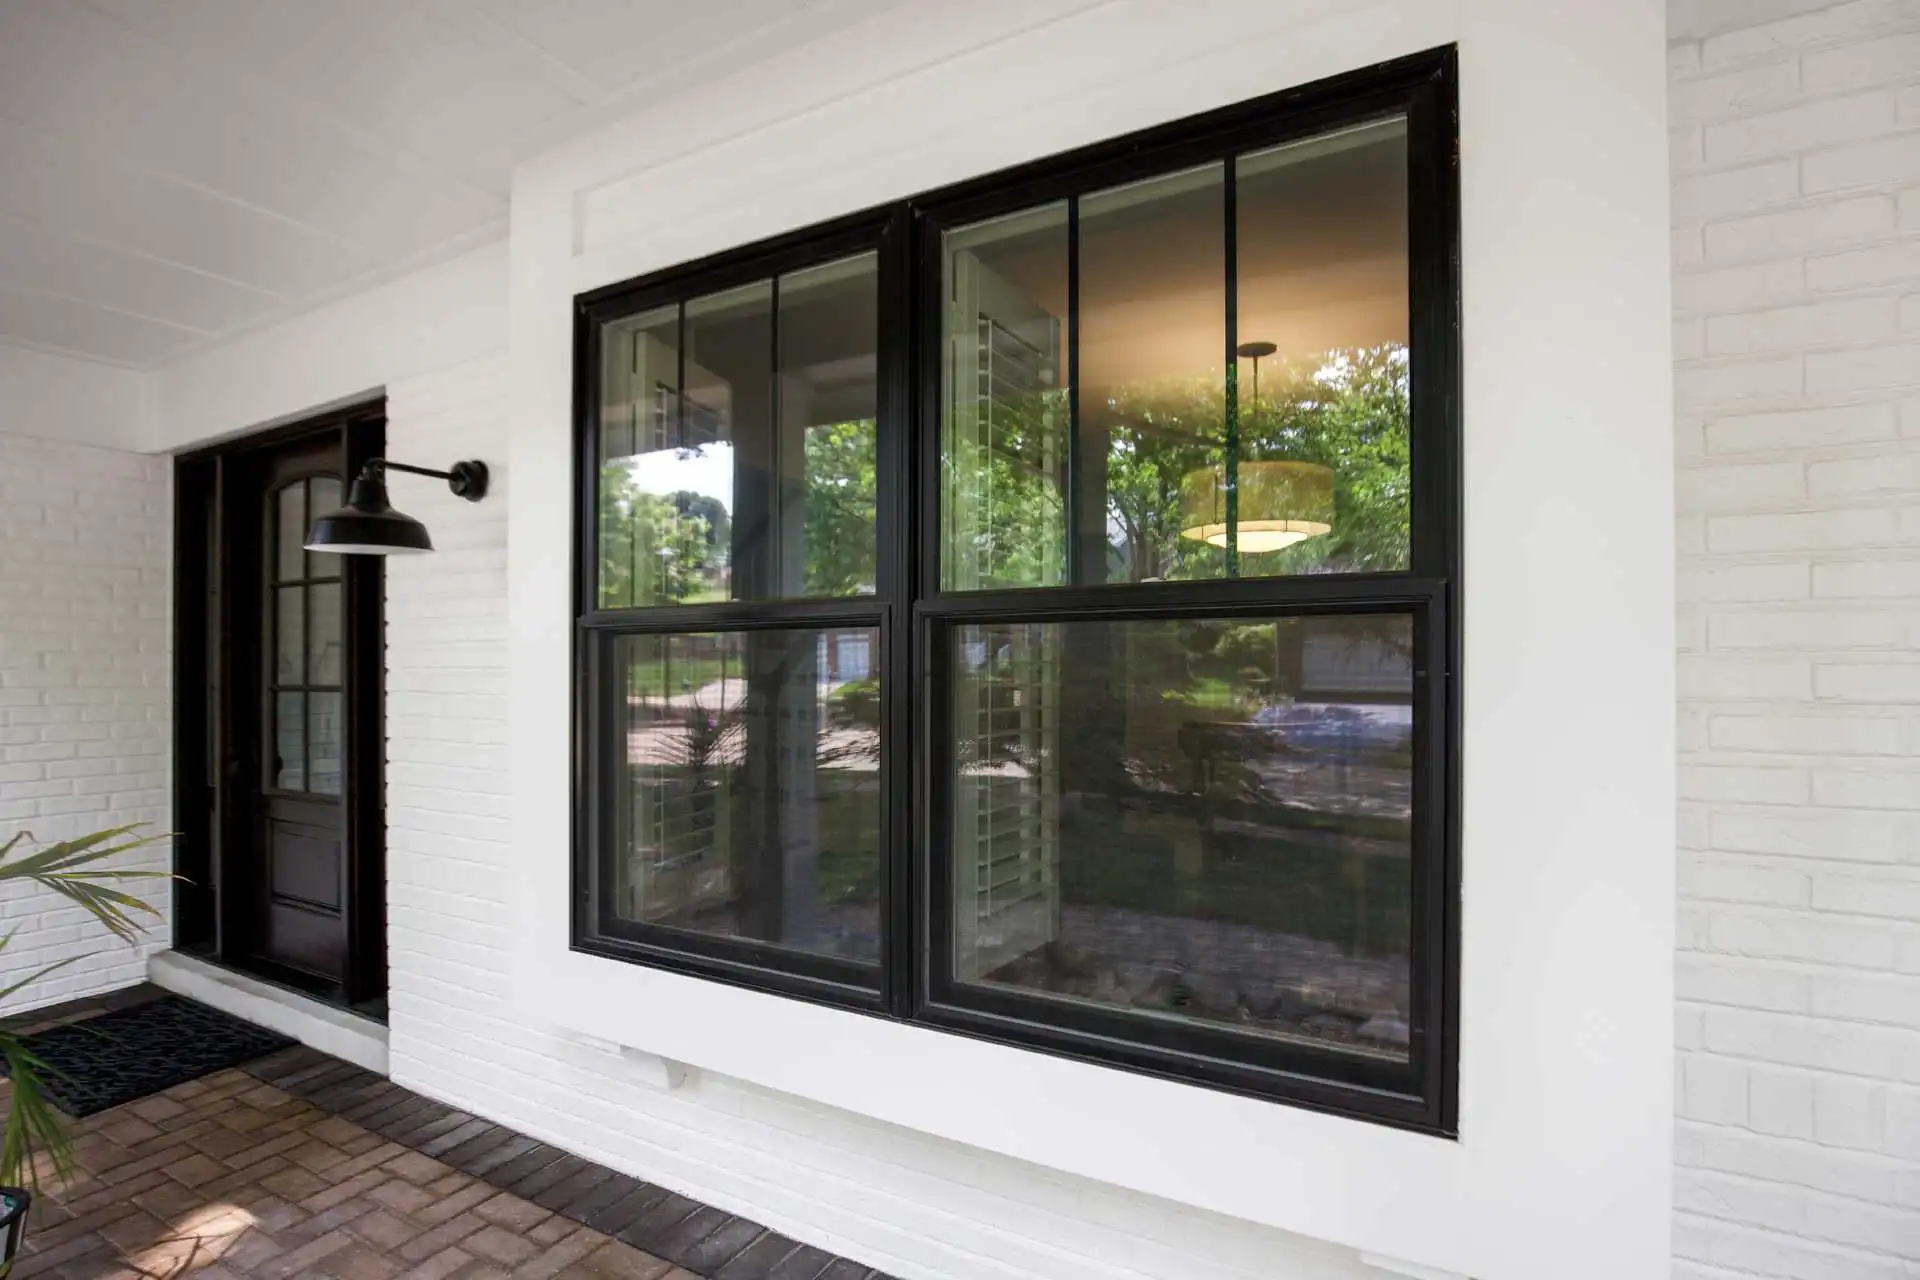 Exterior image featuring Marvin Replacement Double Hung Windows in Ebony exterior finish.